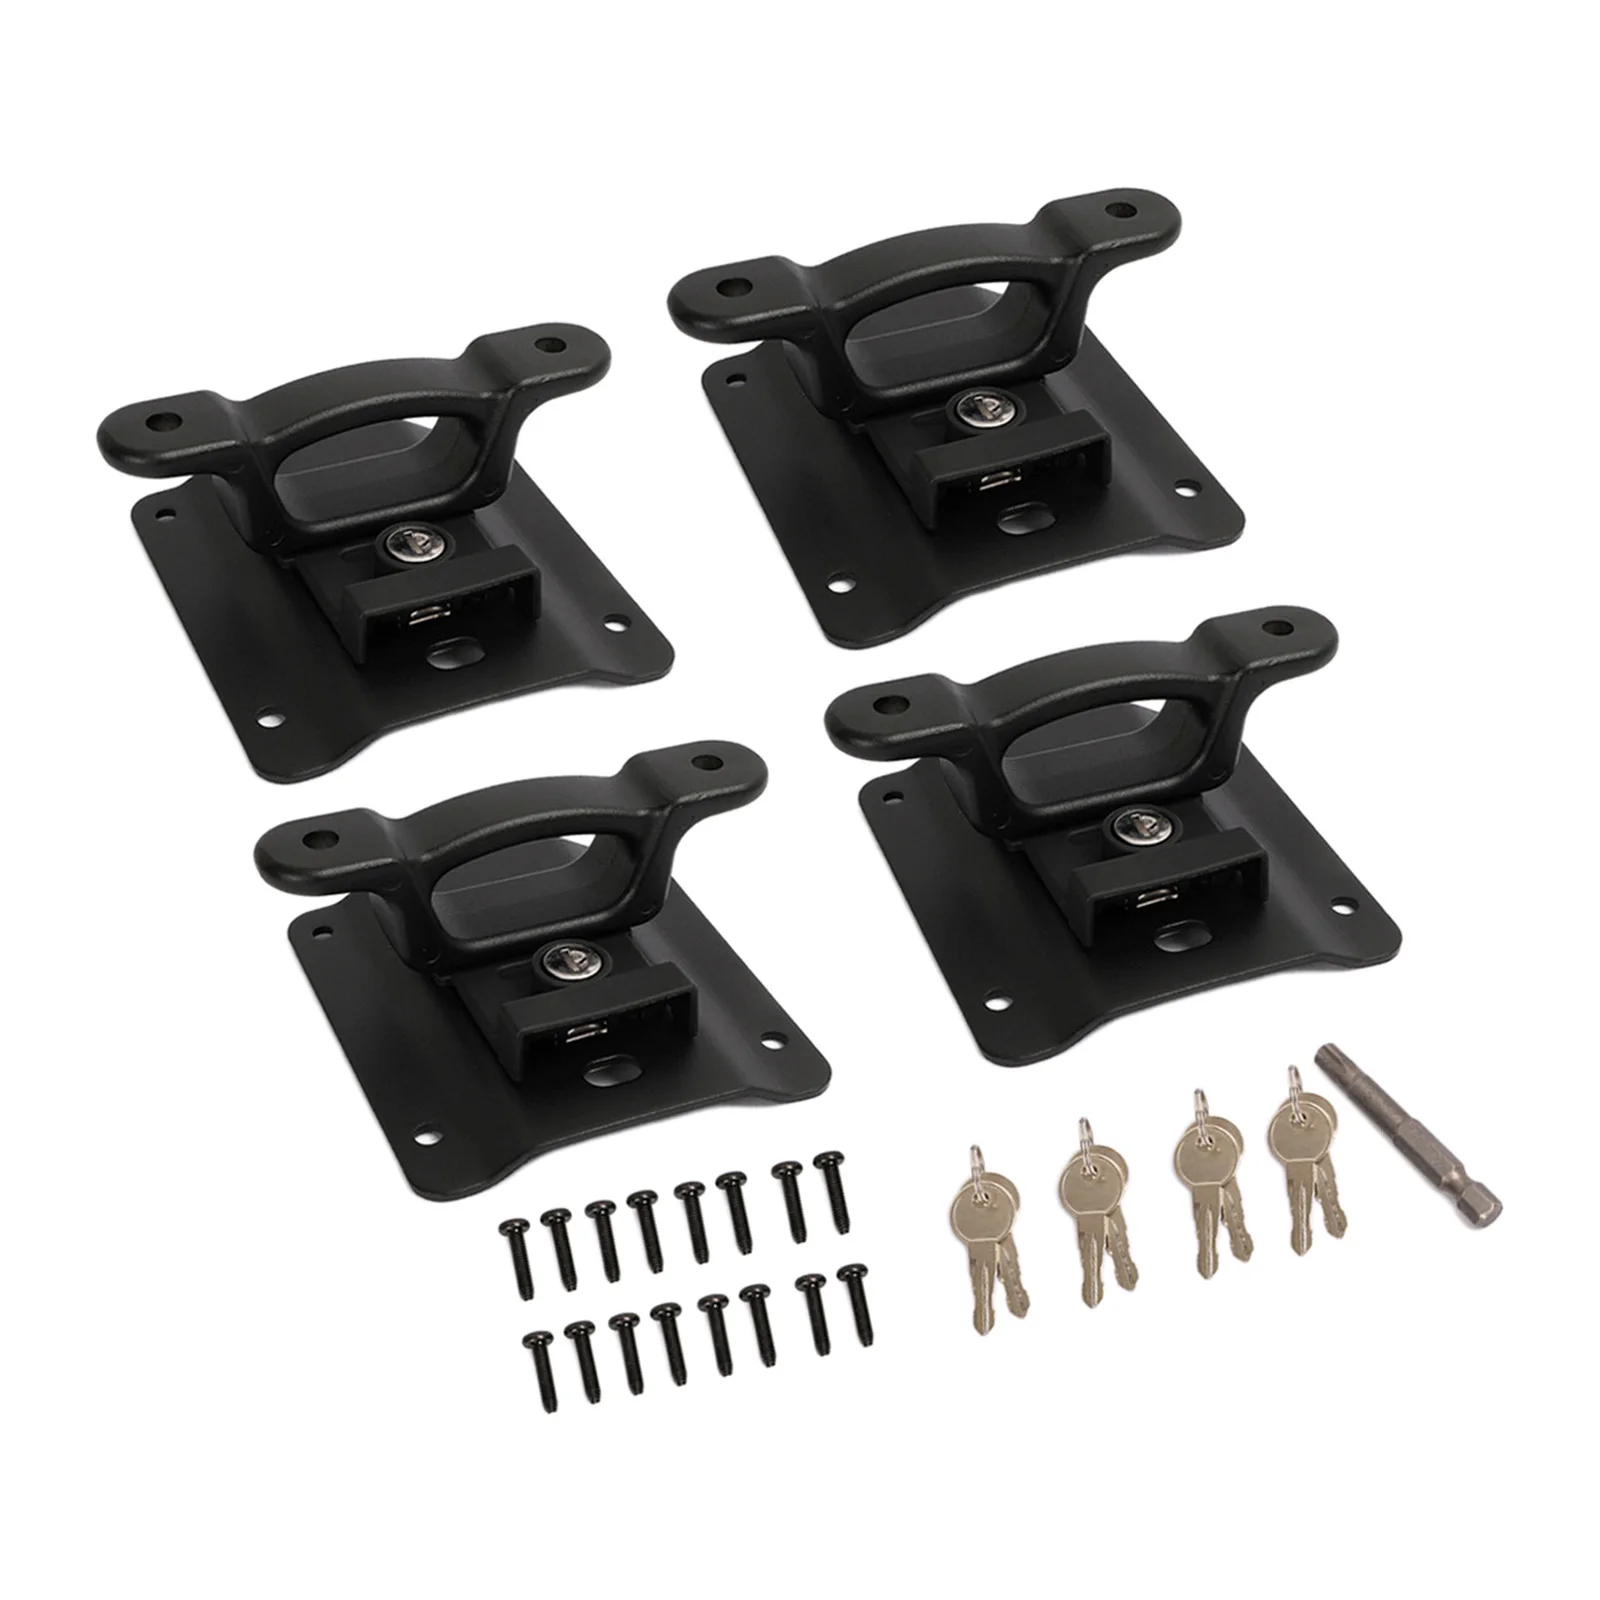 

Set of 4 Bed Tie Down Anchors Brackets with Plates Compatible with Ford F150 F250 2015-2021 FL3Z99000A64B FL3Z99000A64B